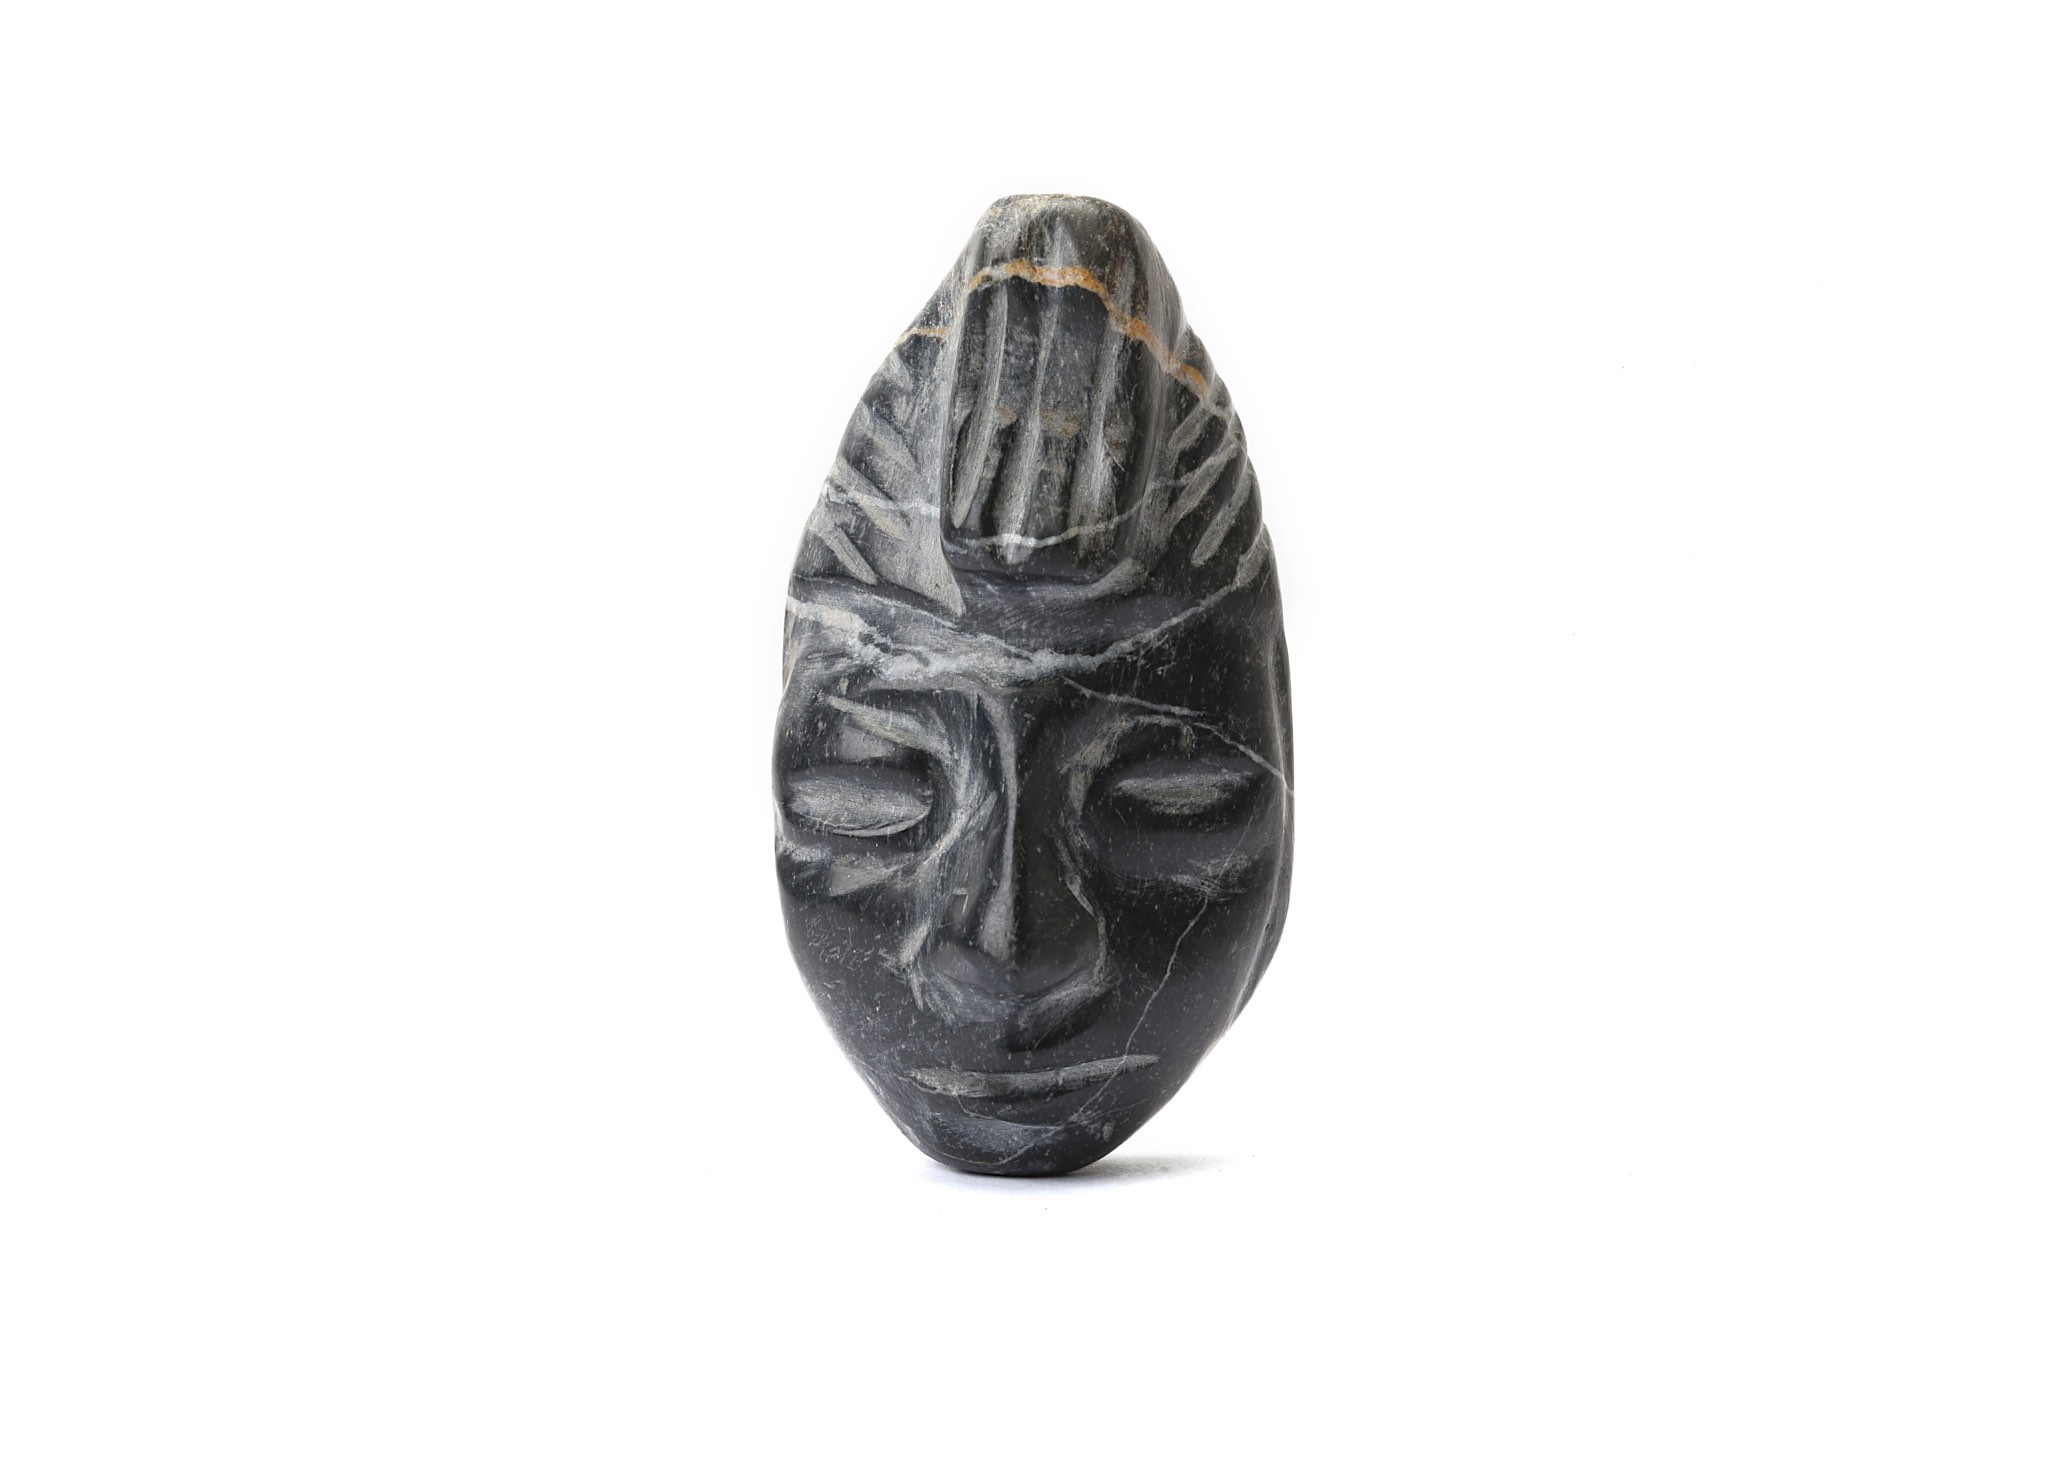 A STONE HEAD, CENTRAL AMERICA Carved in mottled grey stone with a shiny patina, the head wears a